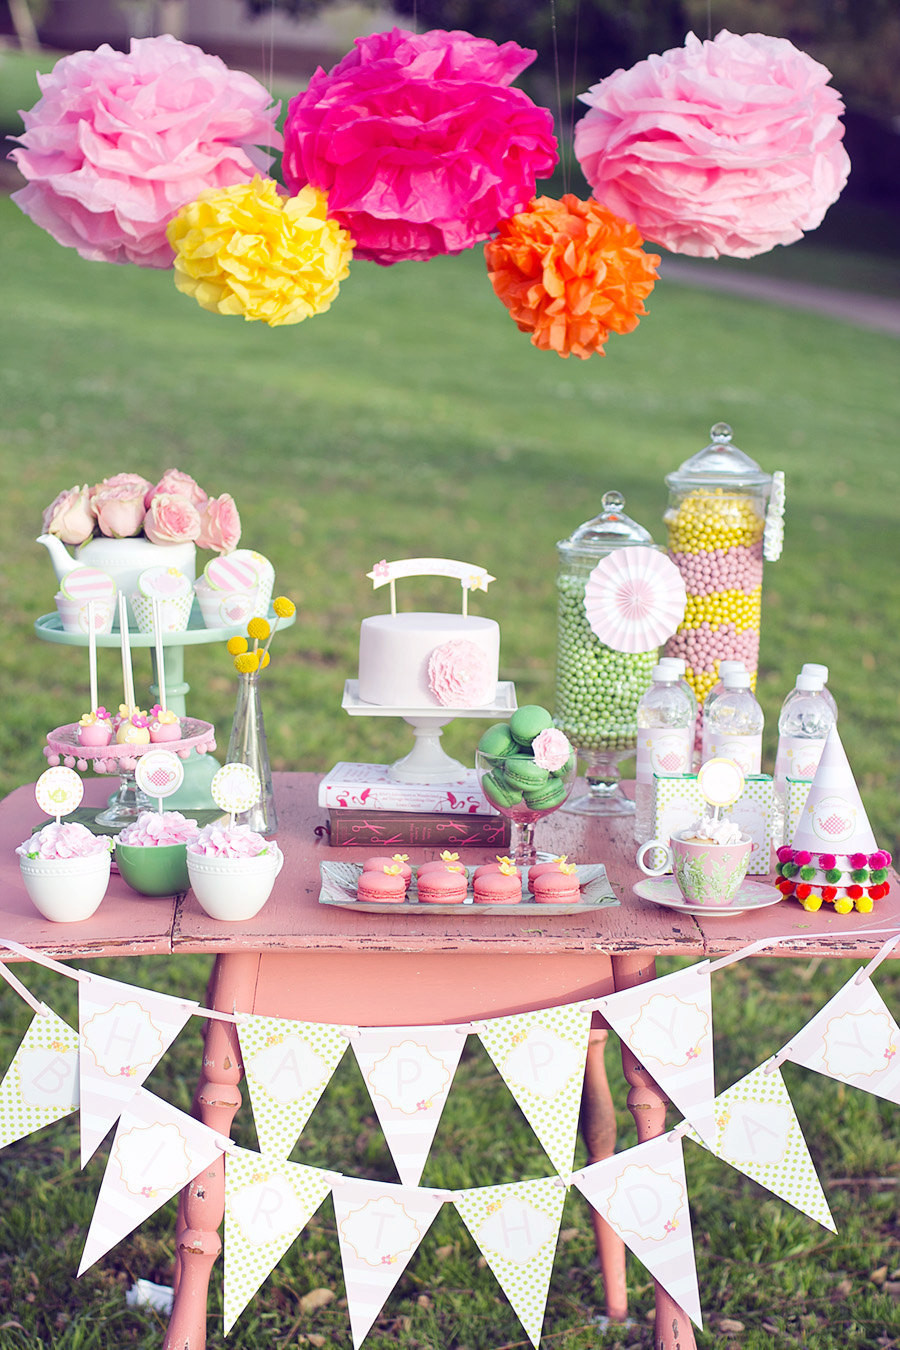 Tea Party Birthday Decorations
 Printable Garden Tea Party Package Featured on Hostess with